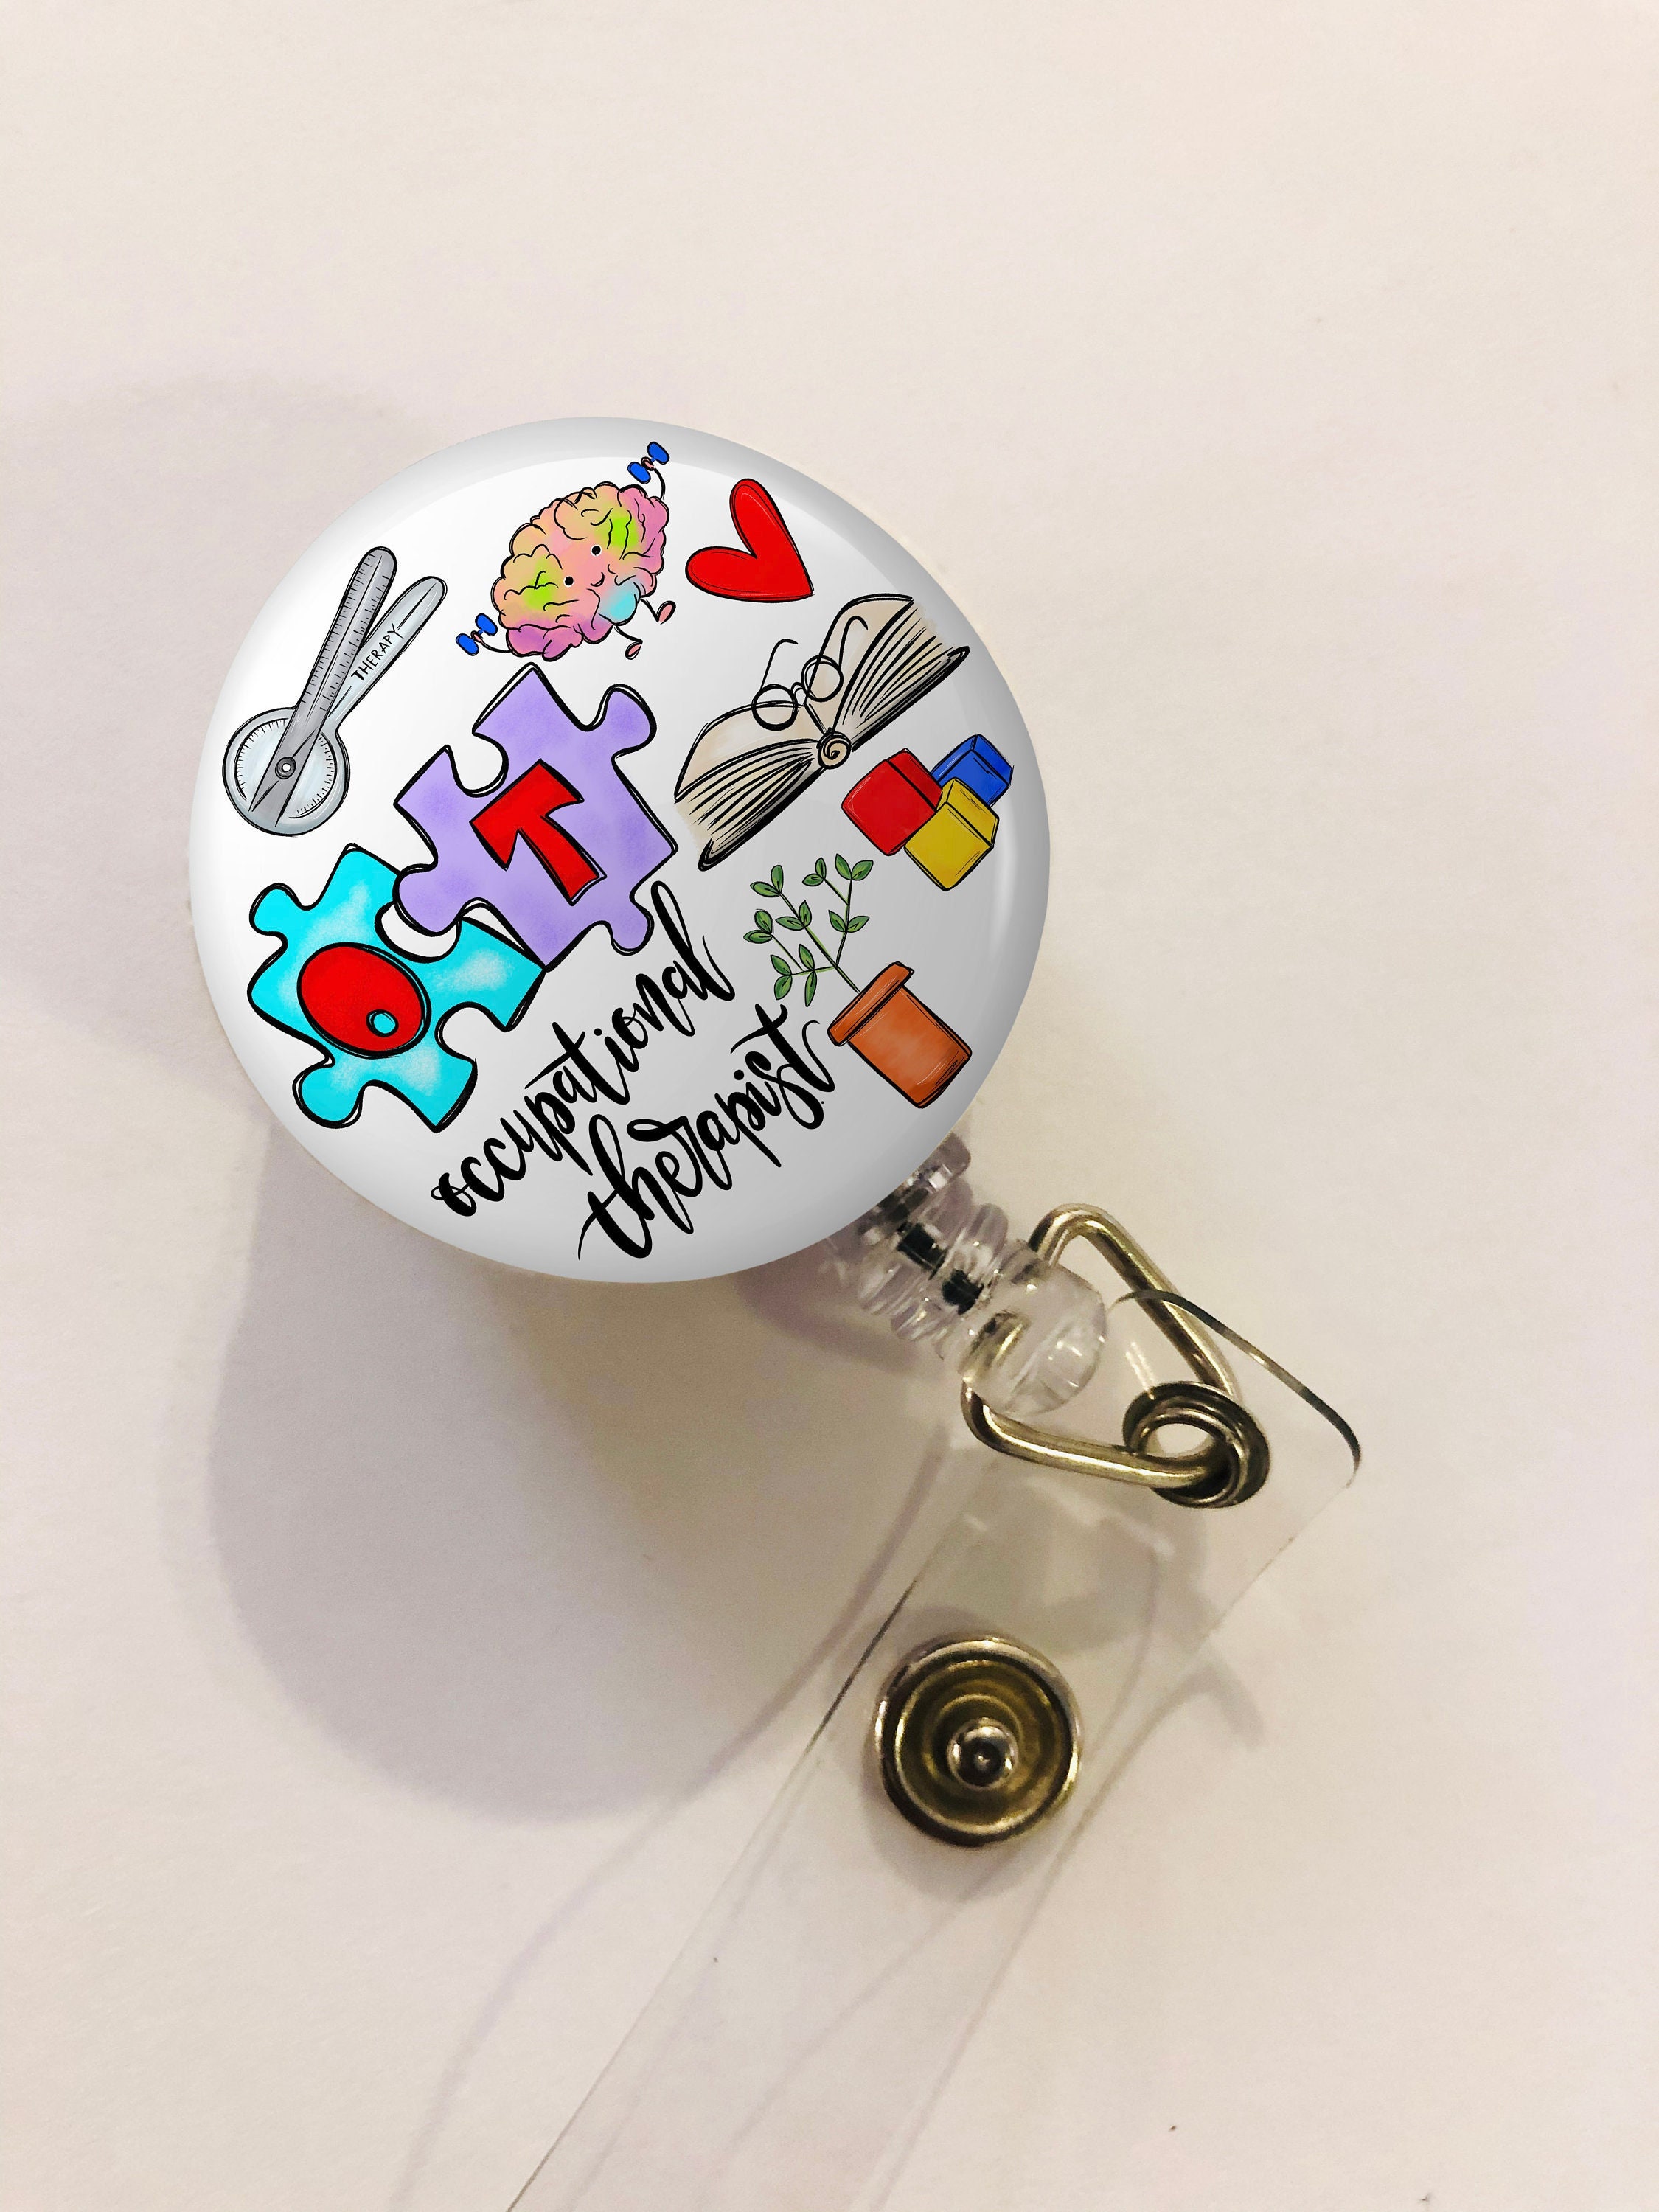 Physical Therapy Adds Life to Days! Retractable ID Badge Reel • Physical Therapist Gift Graduation • Custom Swappable • Swapfinity